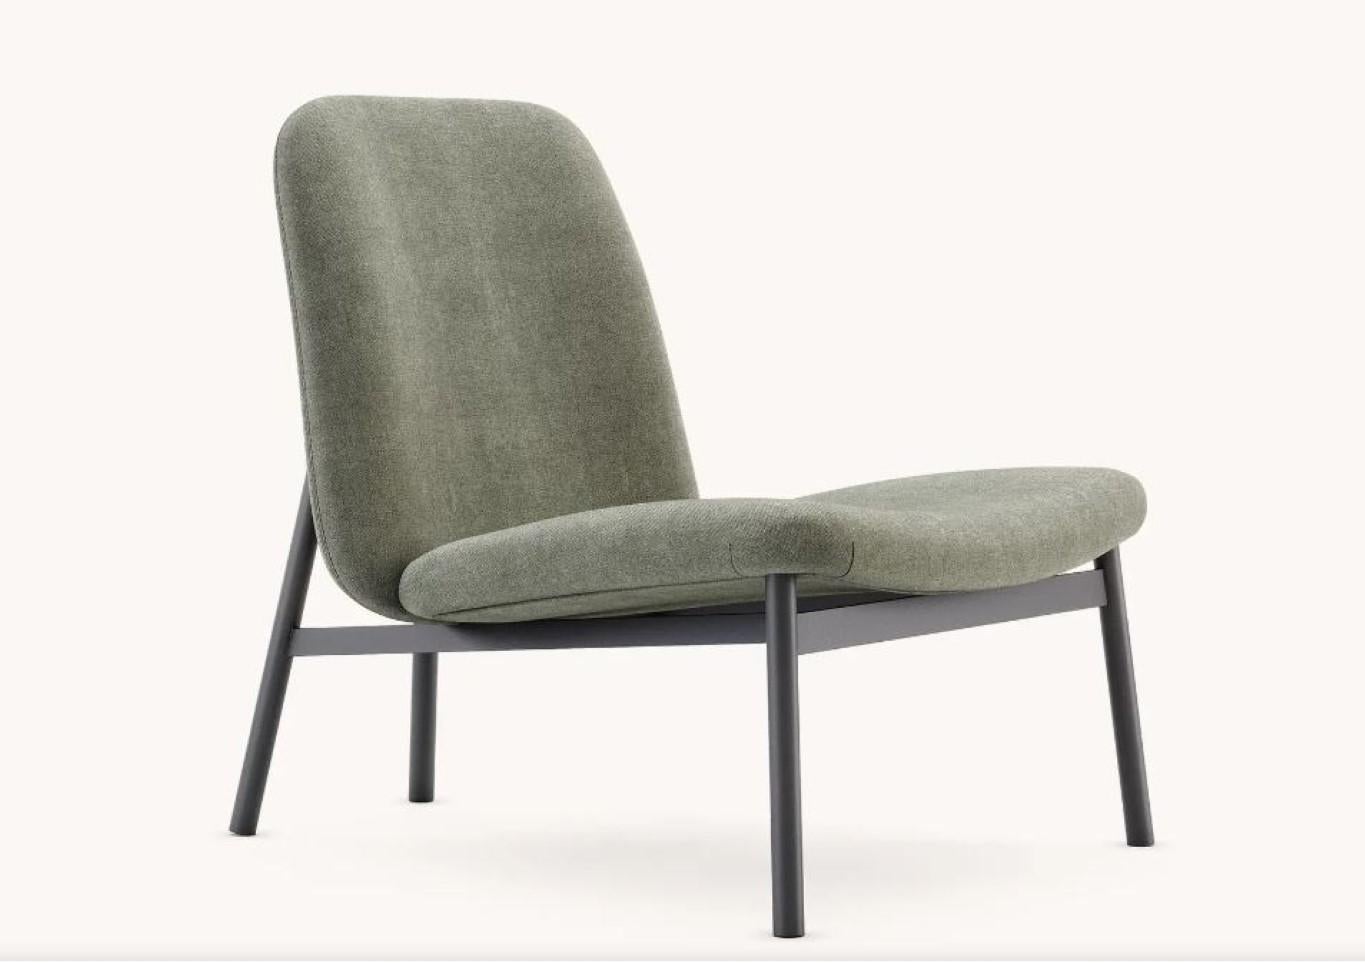 Edison armchair by Domkapa
Materials: Black Texturized Steel, Fabric. 
Dimensions: W 71 x D 88 x H 80 cm.
Also available in different materials. 

This armchair is the epitome of comfort and style combined. Both the back and the seat present a